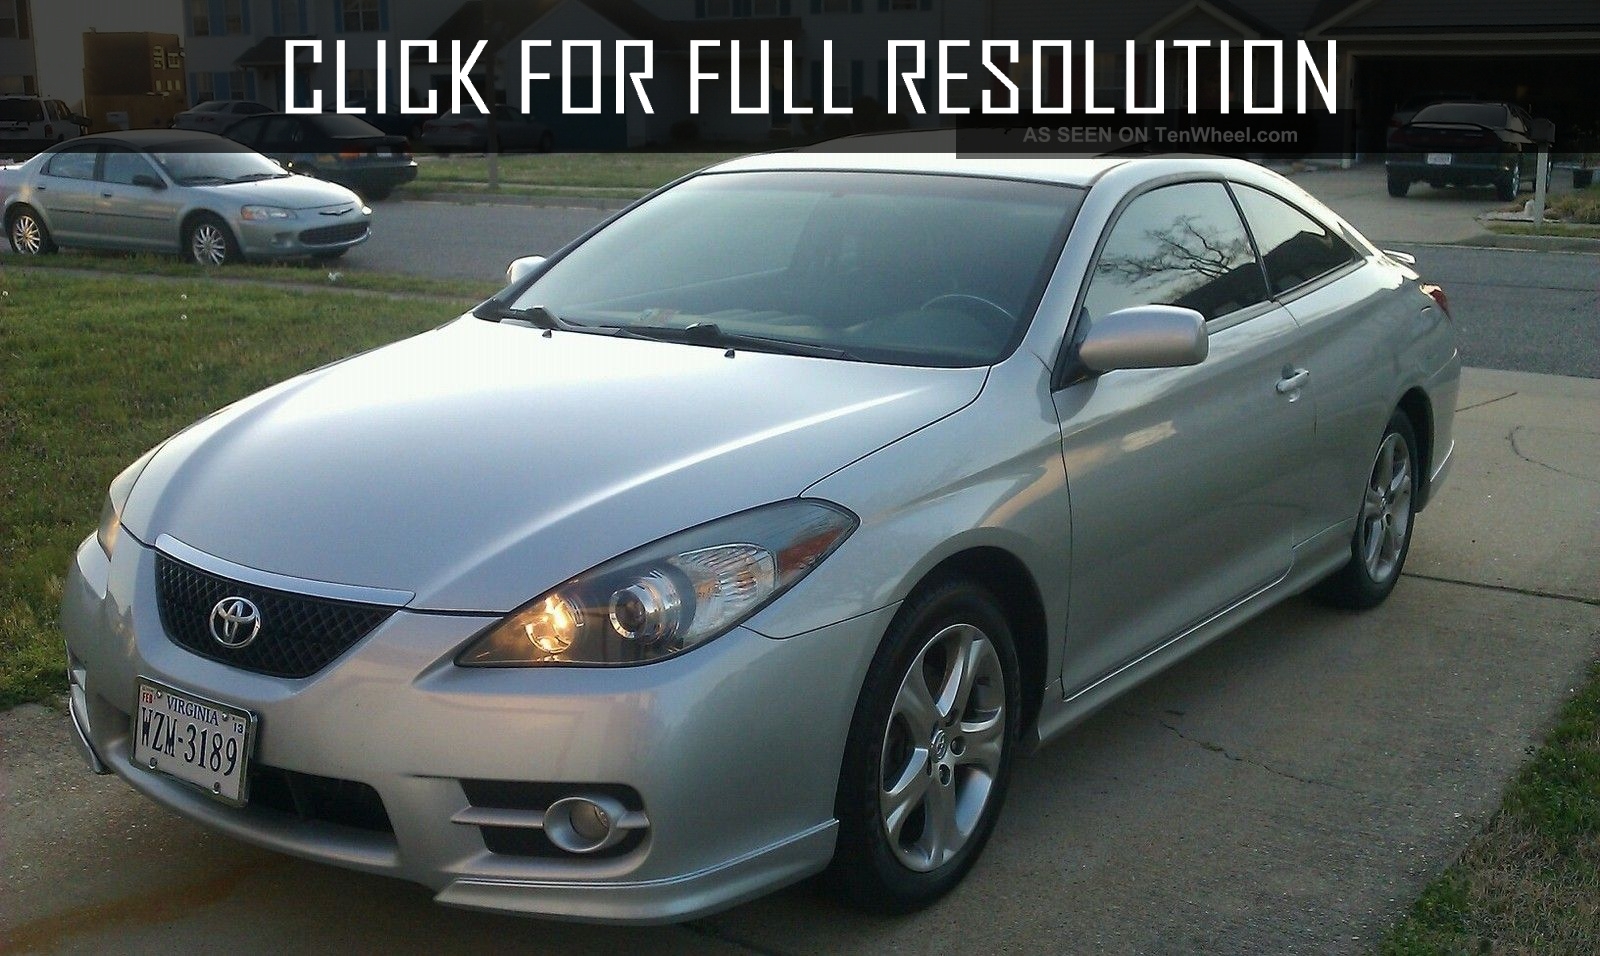 2007 Toyota Camry Coupe